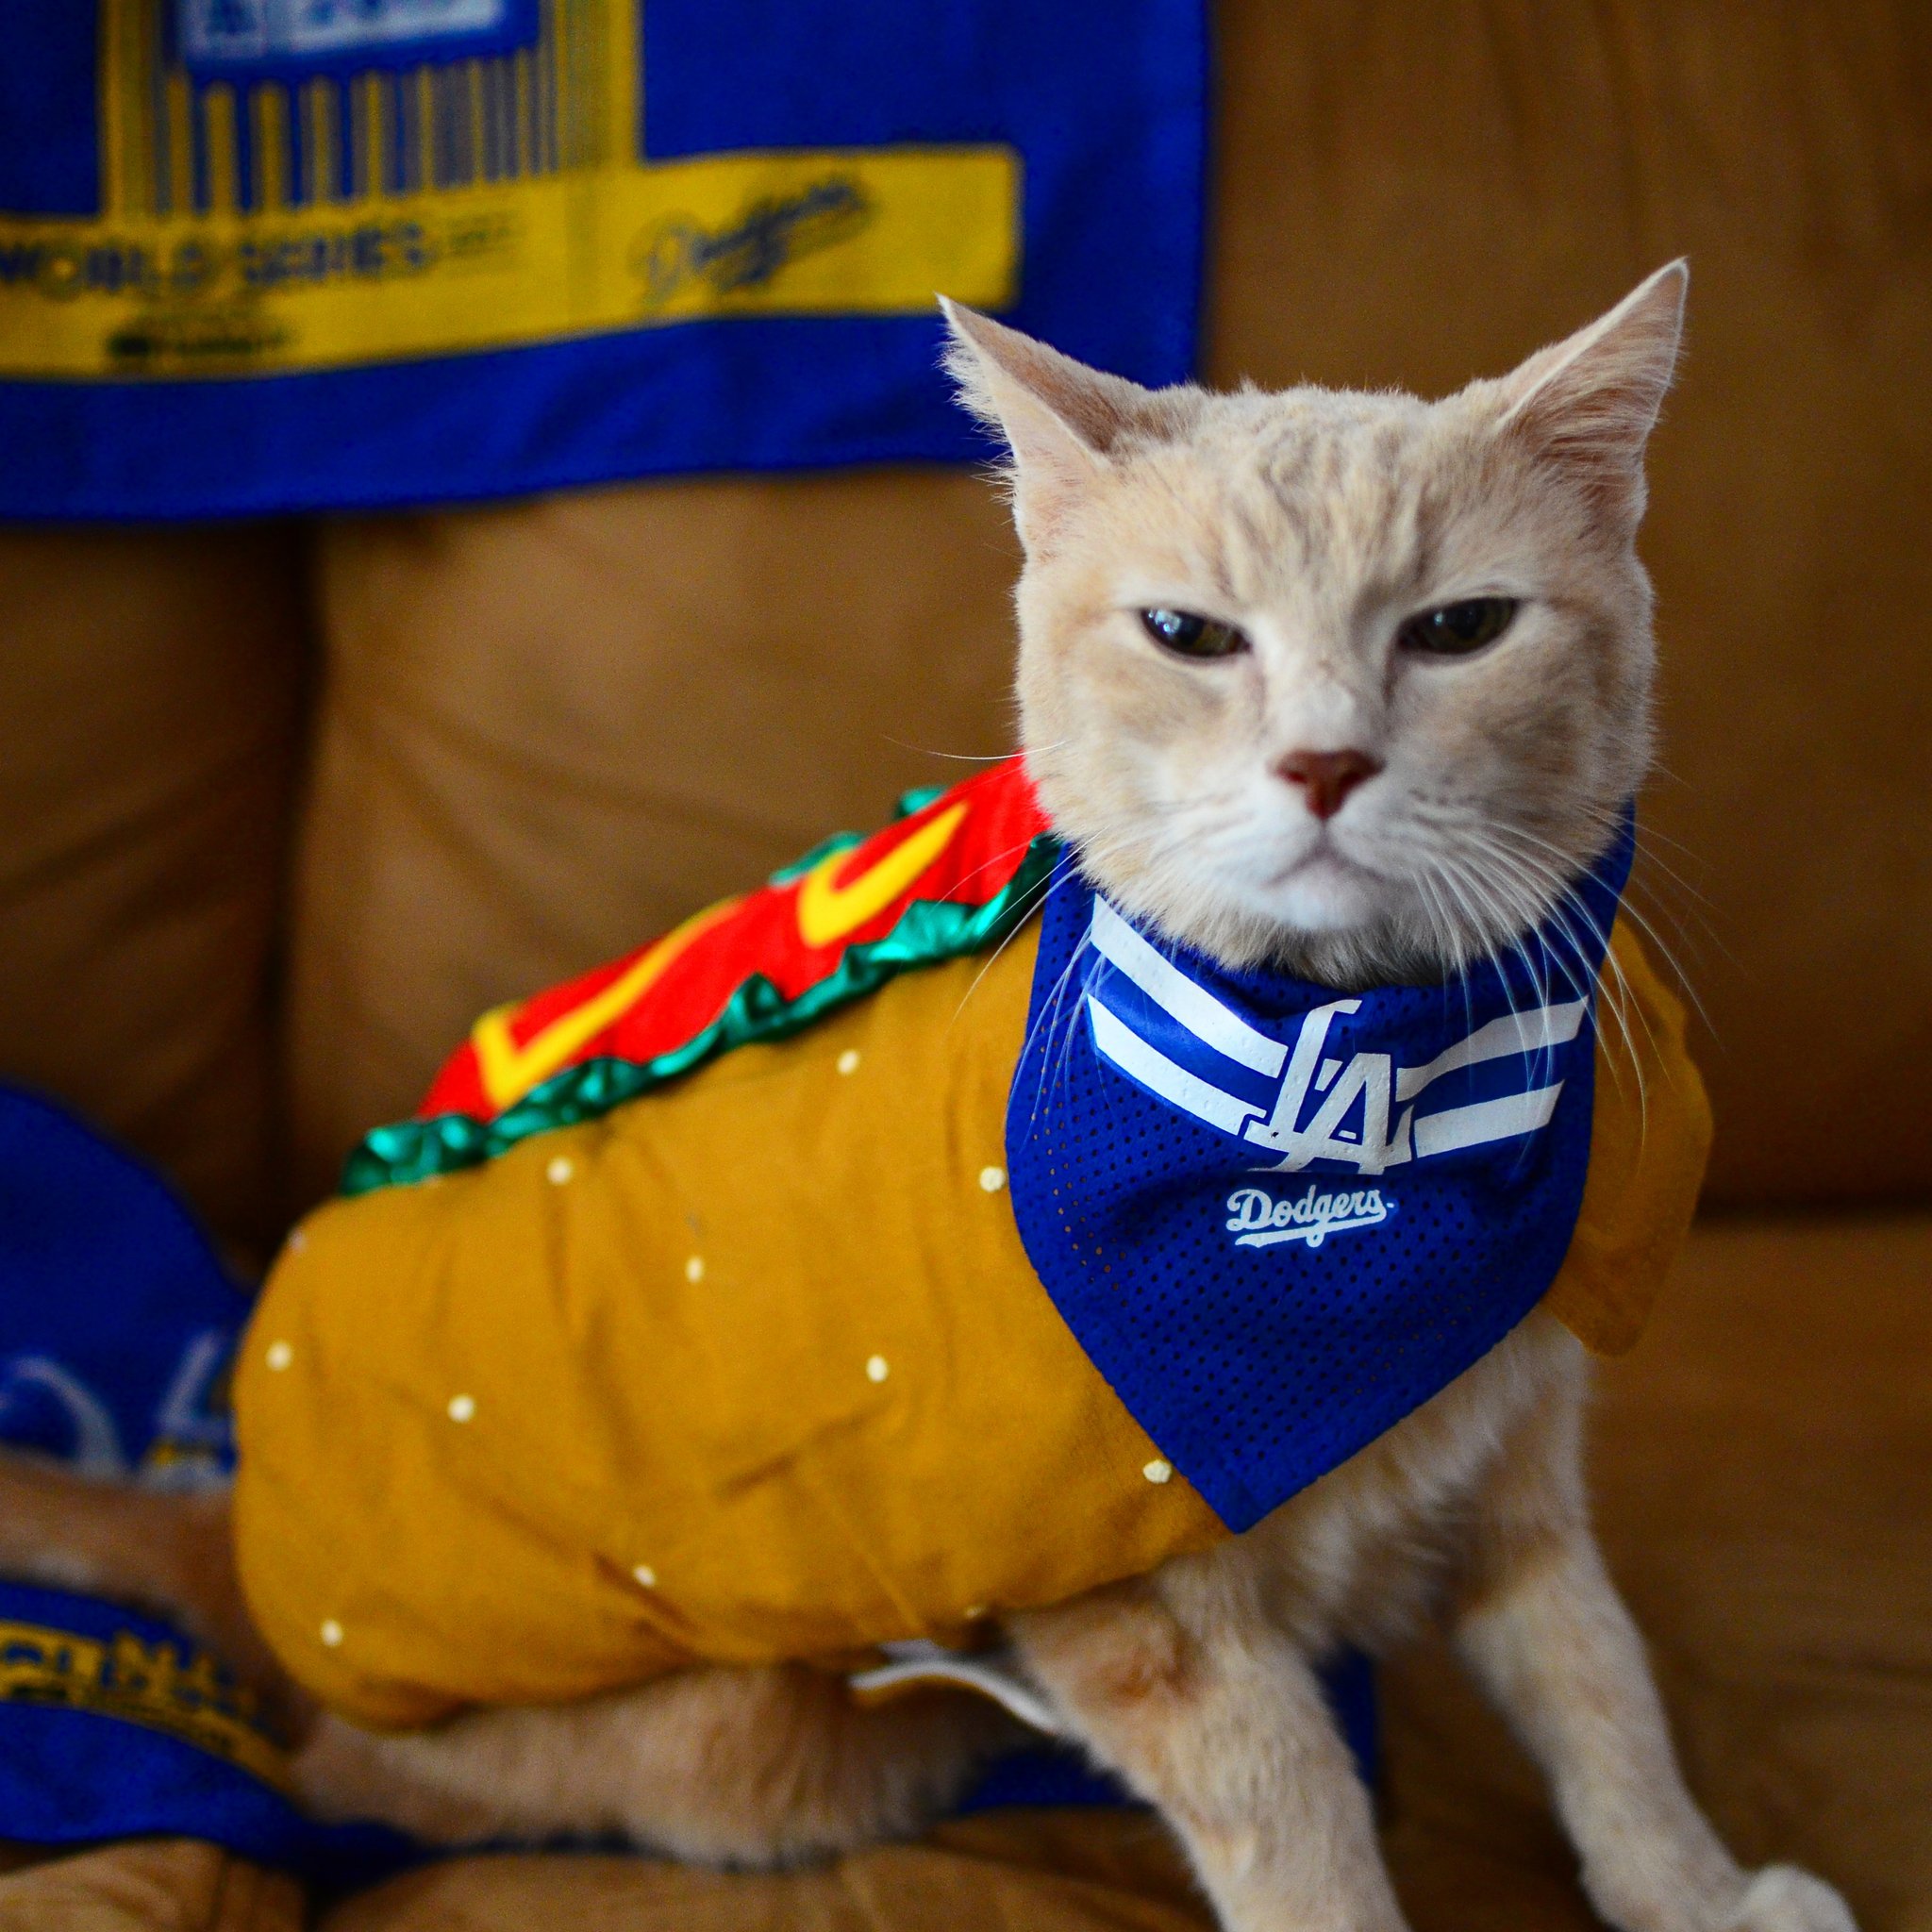 Rally Cat on X: Happy Halloween from the Dodger Dog-cat!!! My mom